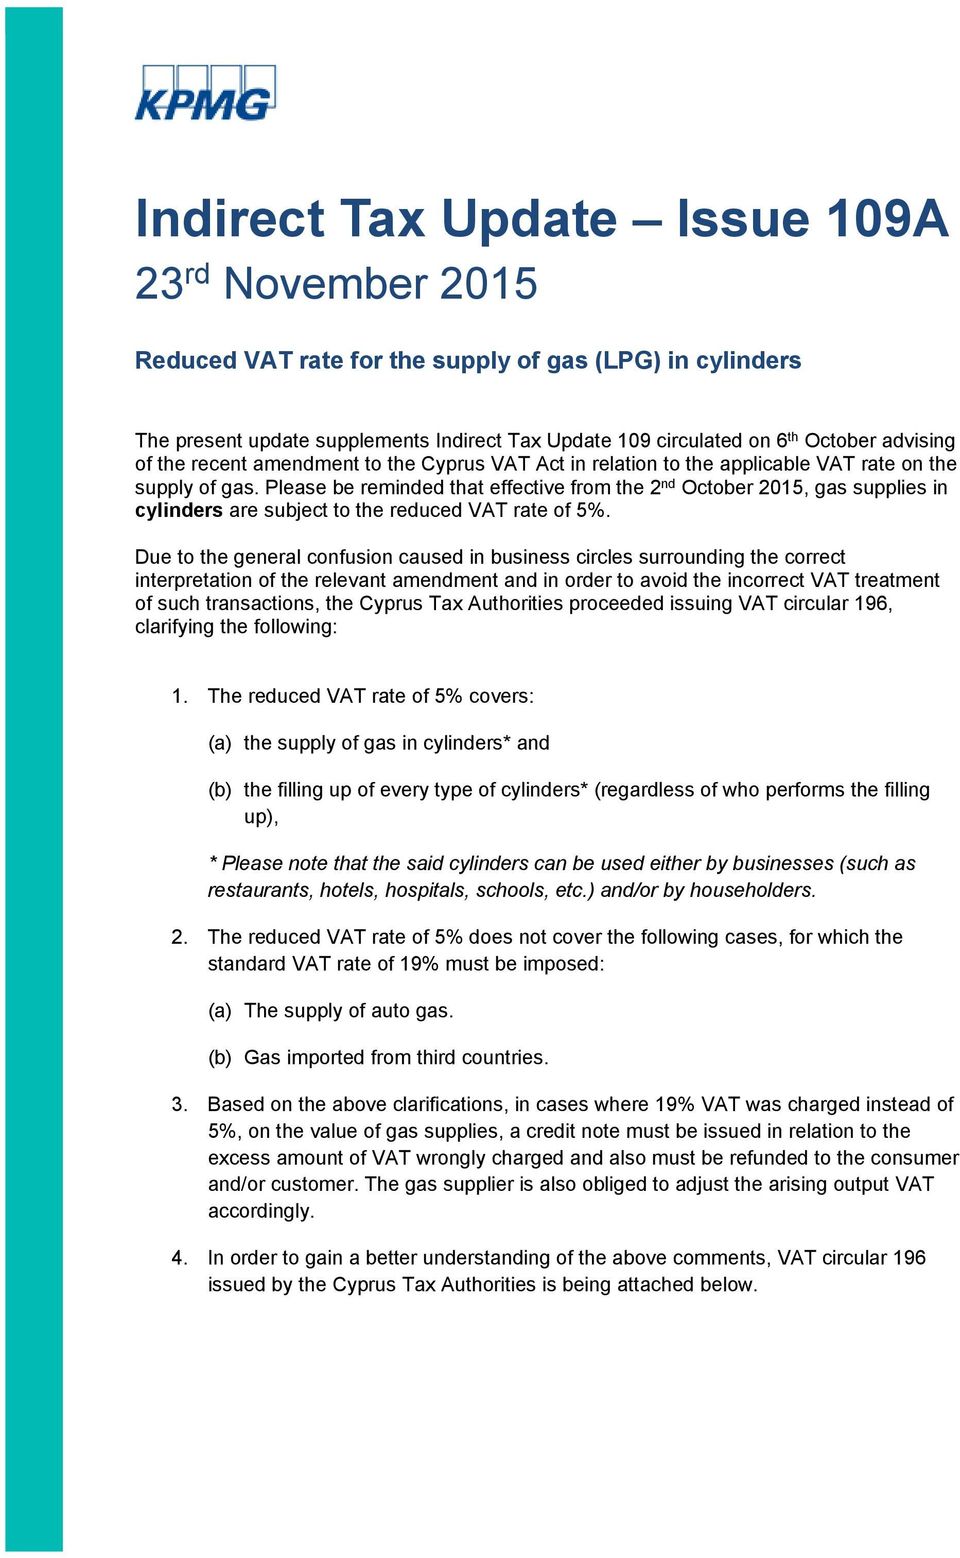 Please be reminded that effective from the 2 nd October 2015, gas supplies in cylinders are subject to the reduced VAT rate of 5%.